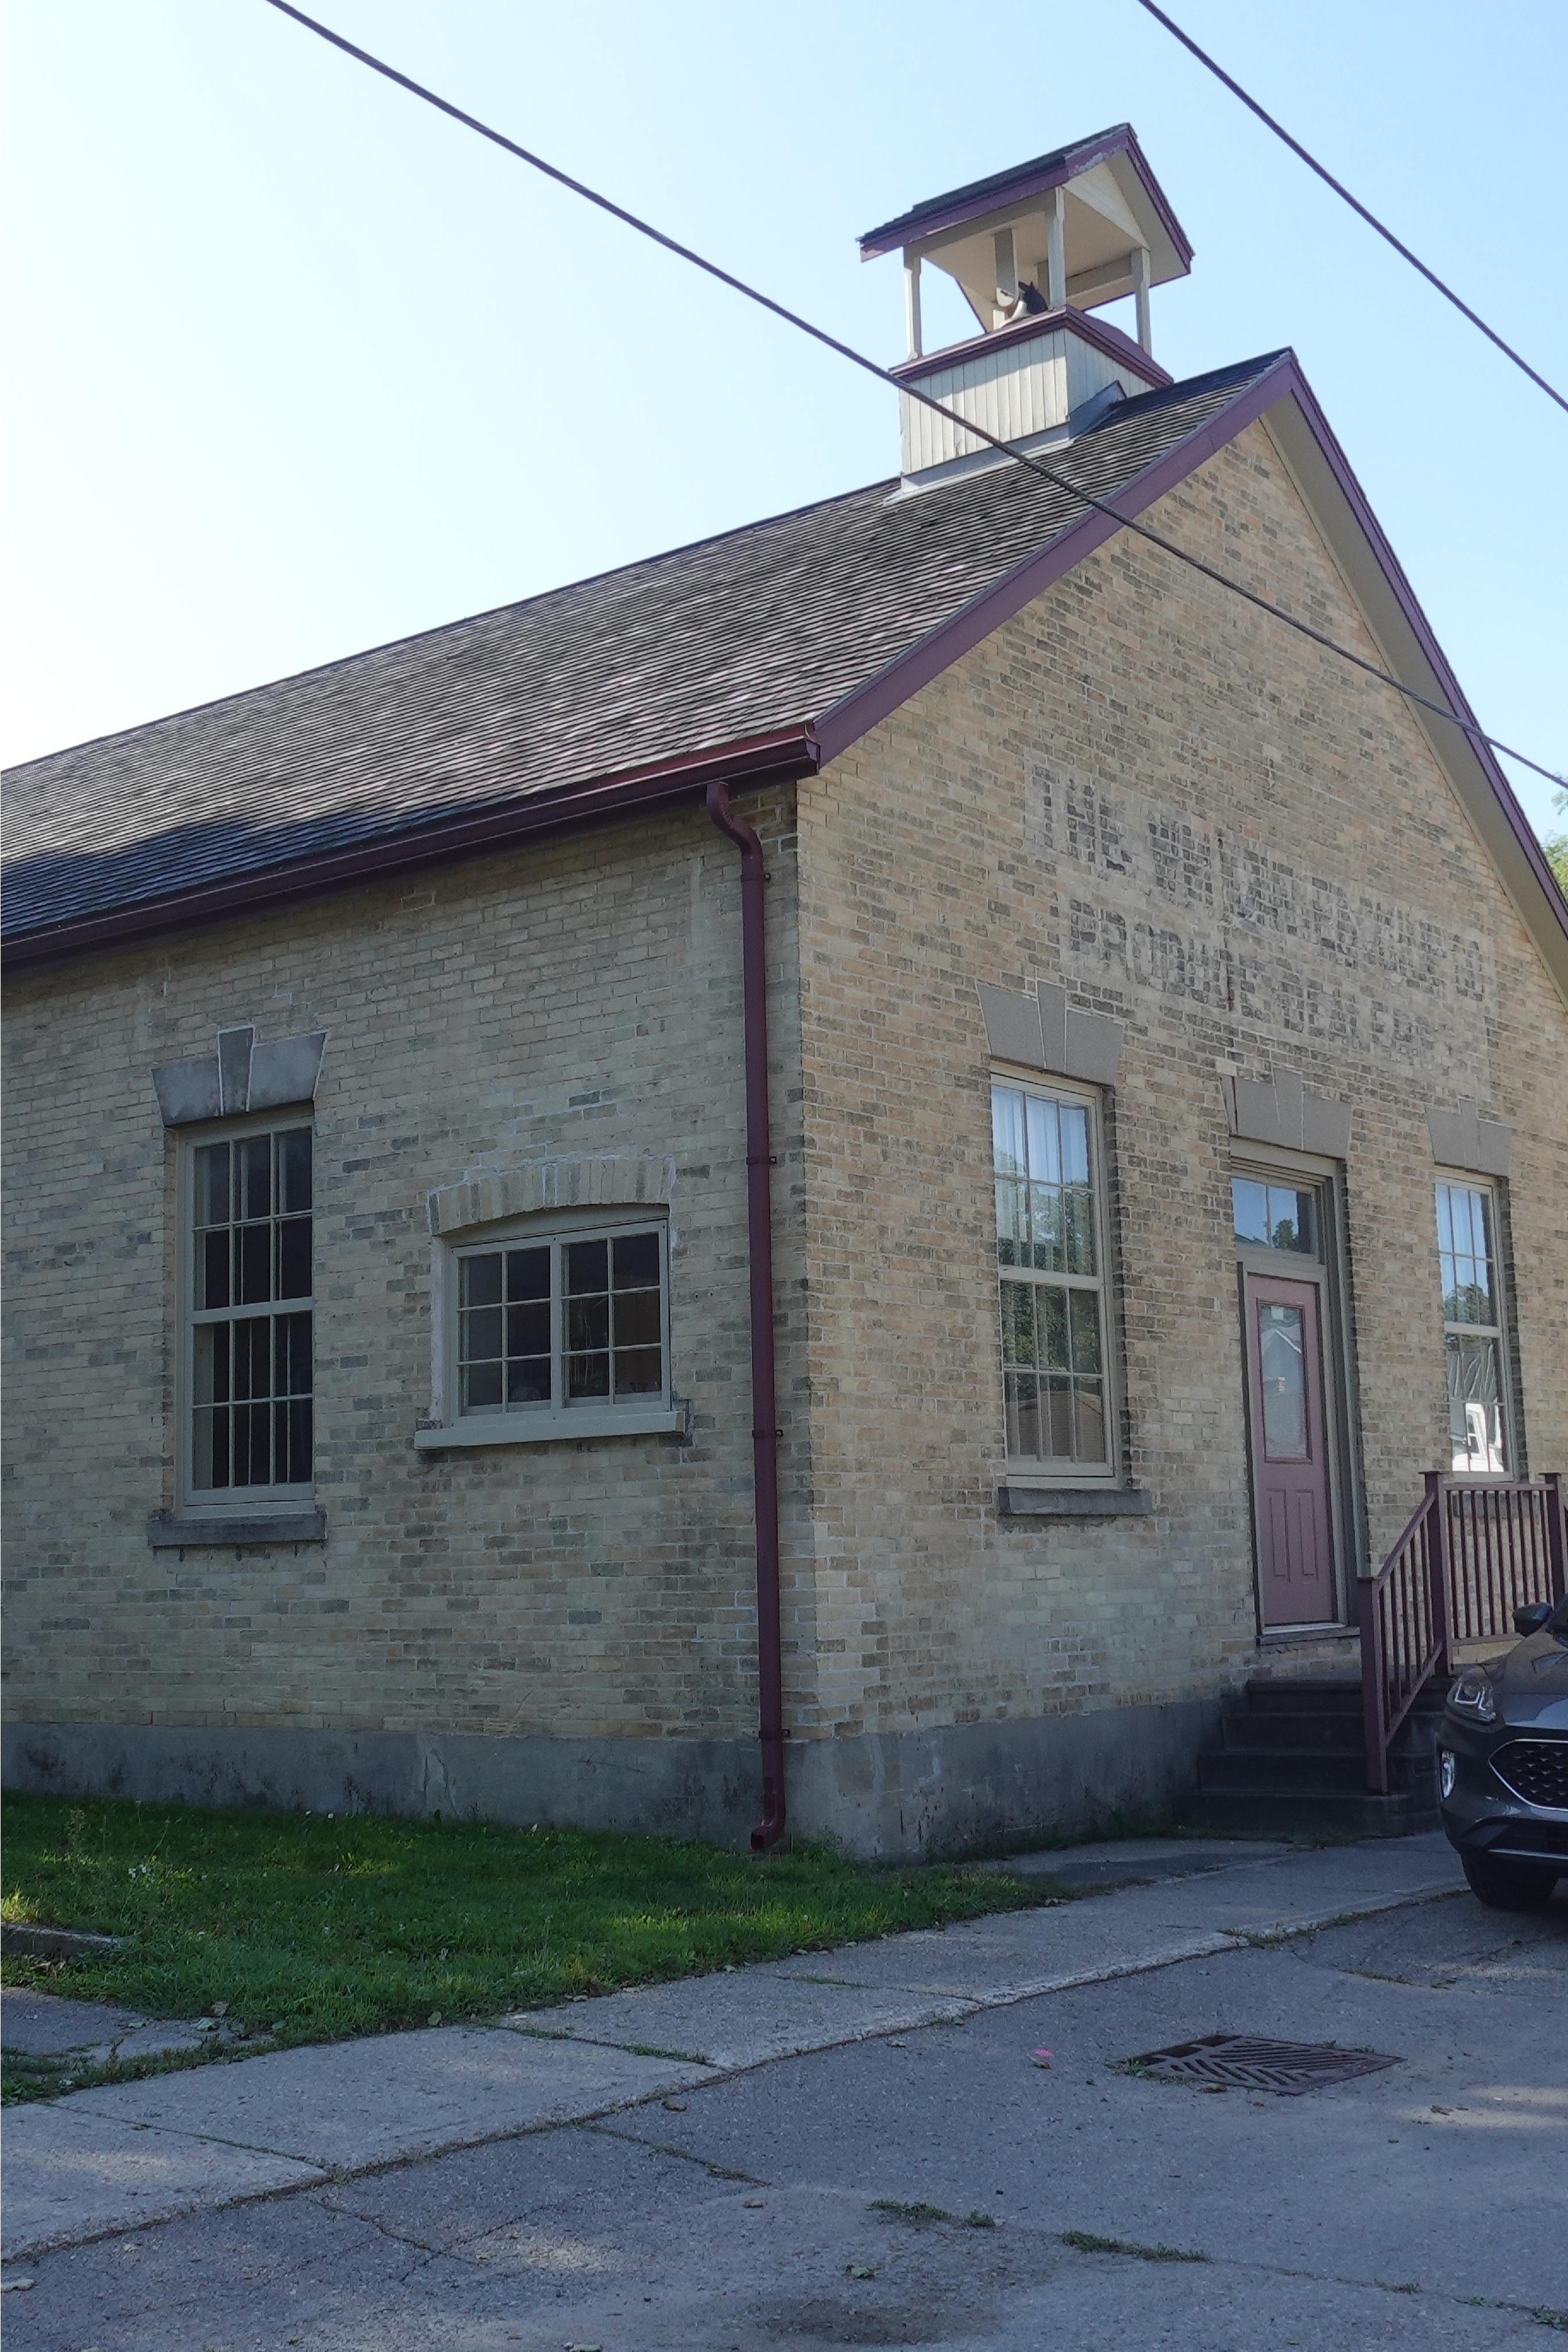 A photo of Temperance Hall in Wingham, Ontario